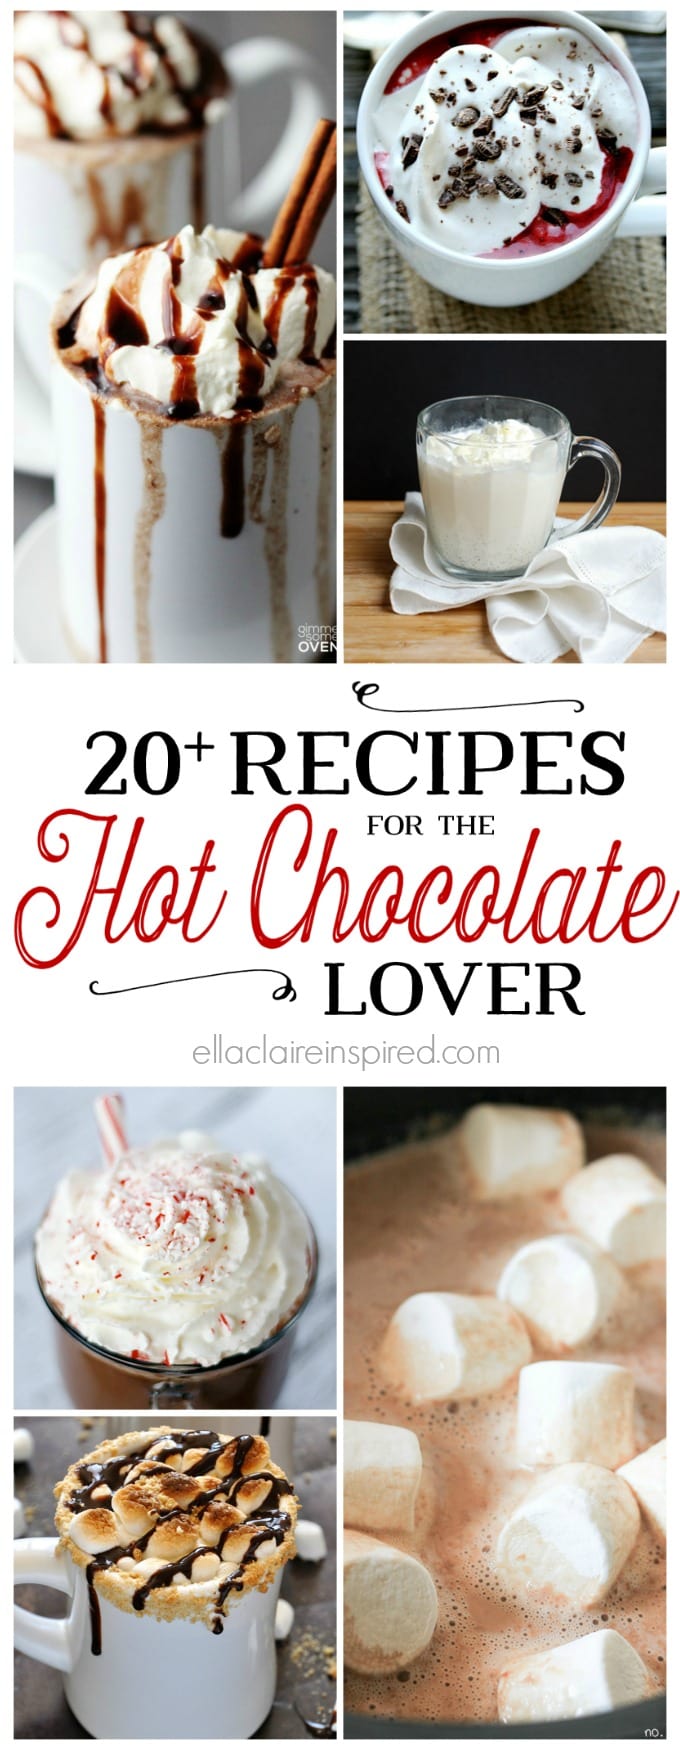 Nothing satisfies that winter sweet tooth like a warm cup of hot chocolate. These 20 decadent recipes will keep you cozy all winter long. Find them here at ellaclaireinspired.com